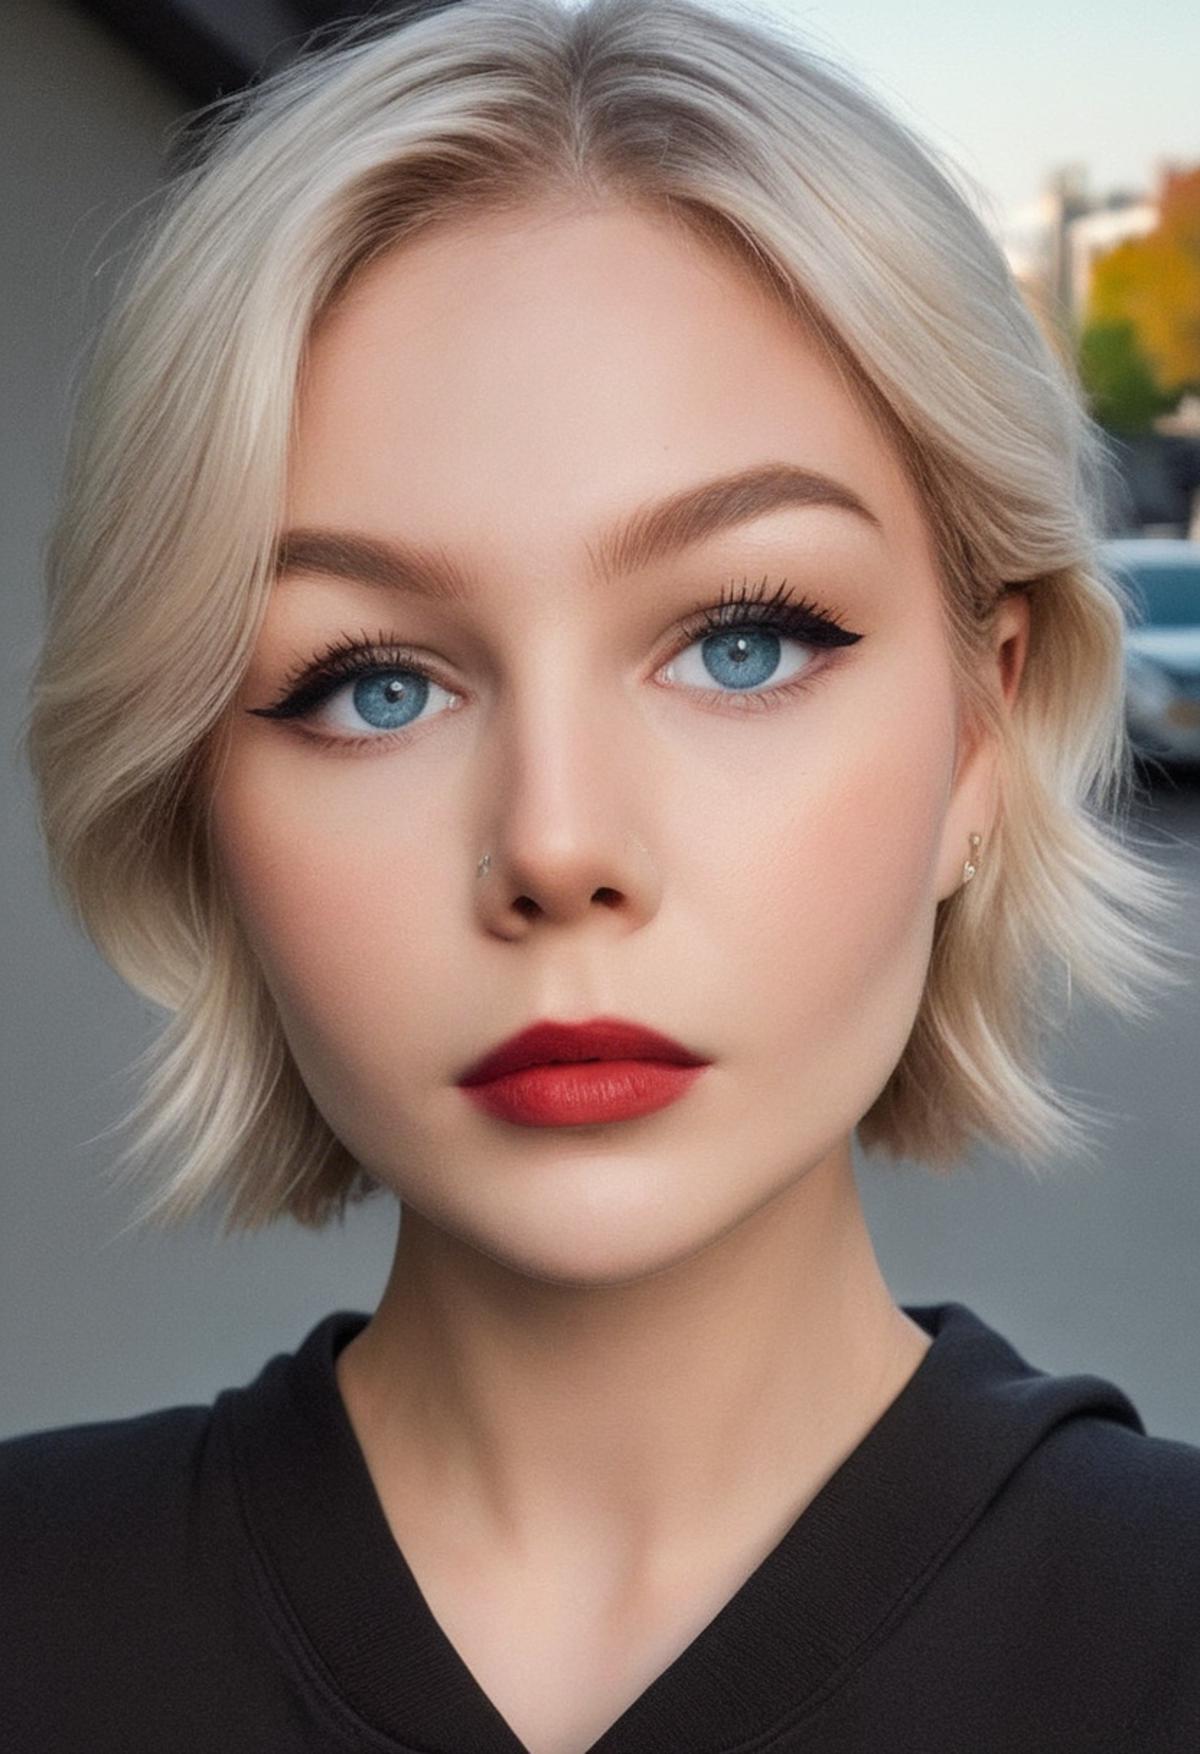 AI model image by Catz